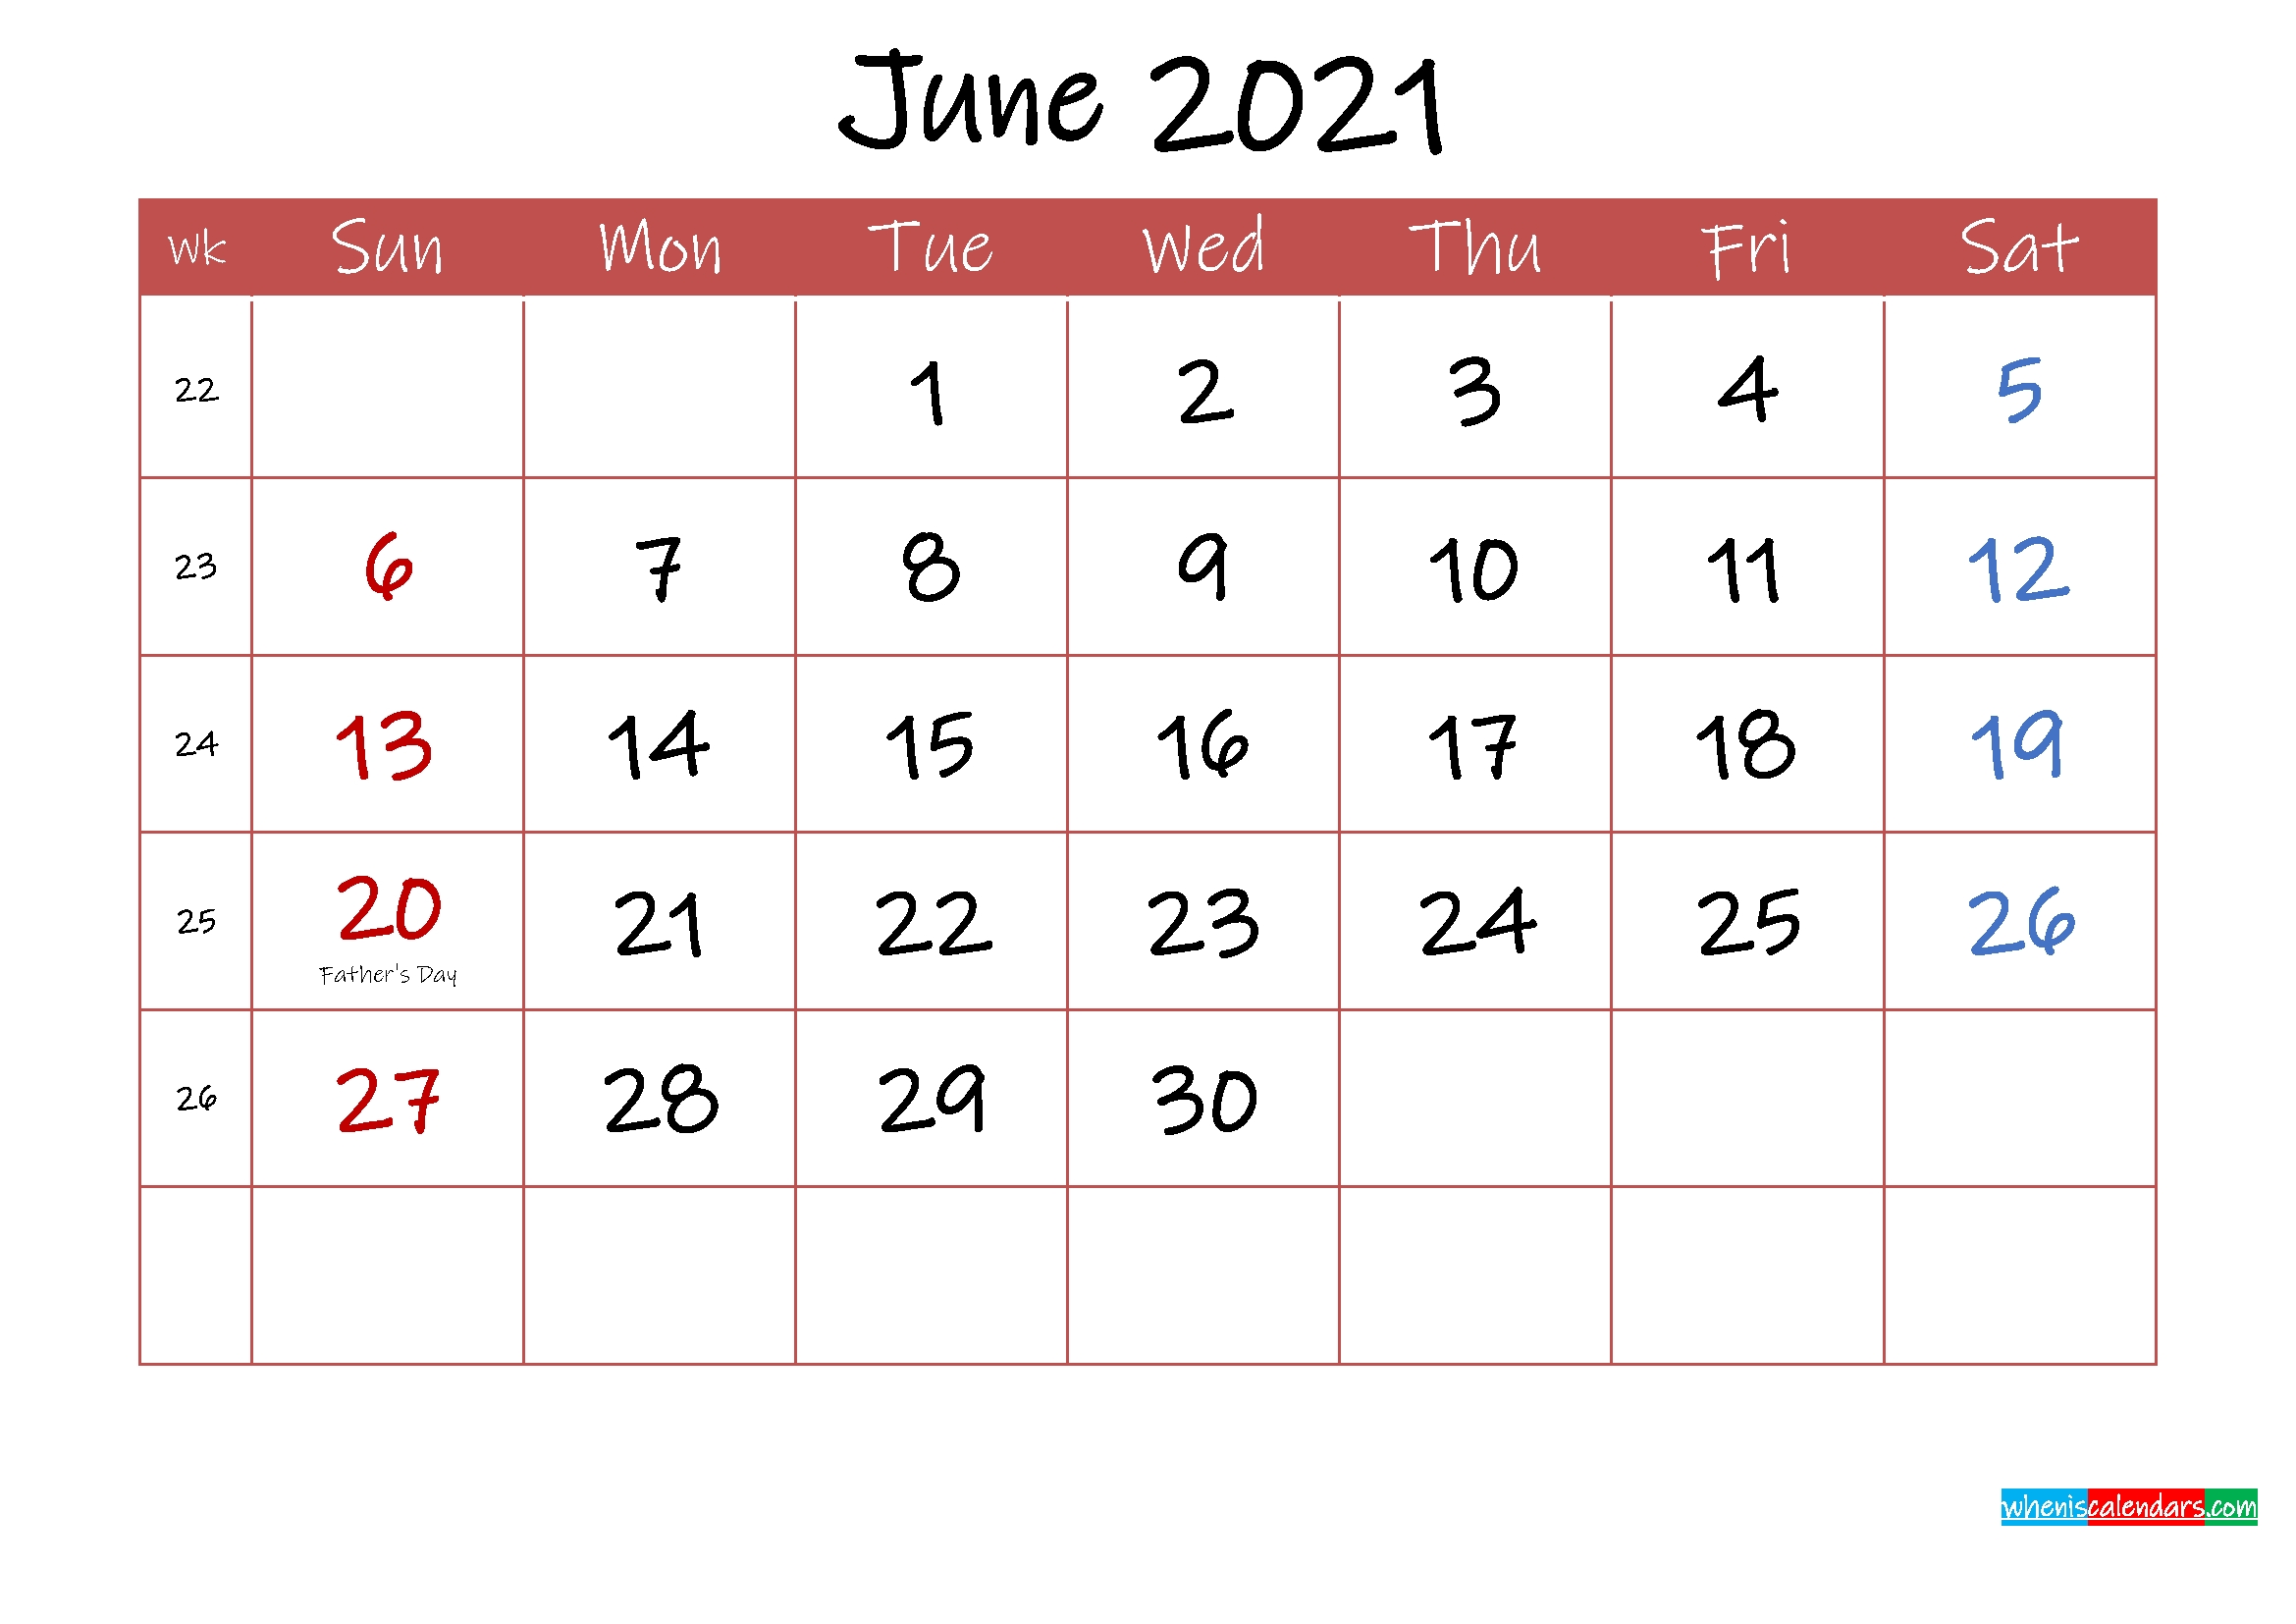 Printable June 2021 Calendar With Holidays - Template Ink21M30 Printable May And June 2021 Calendar